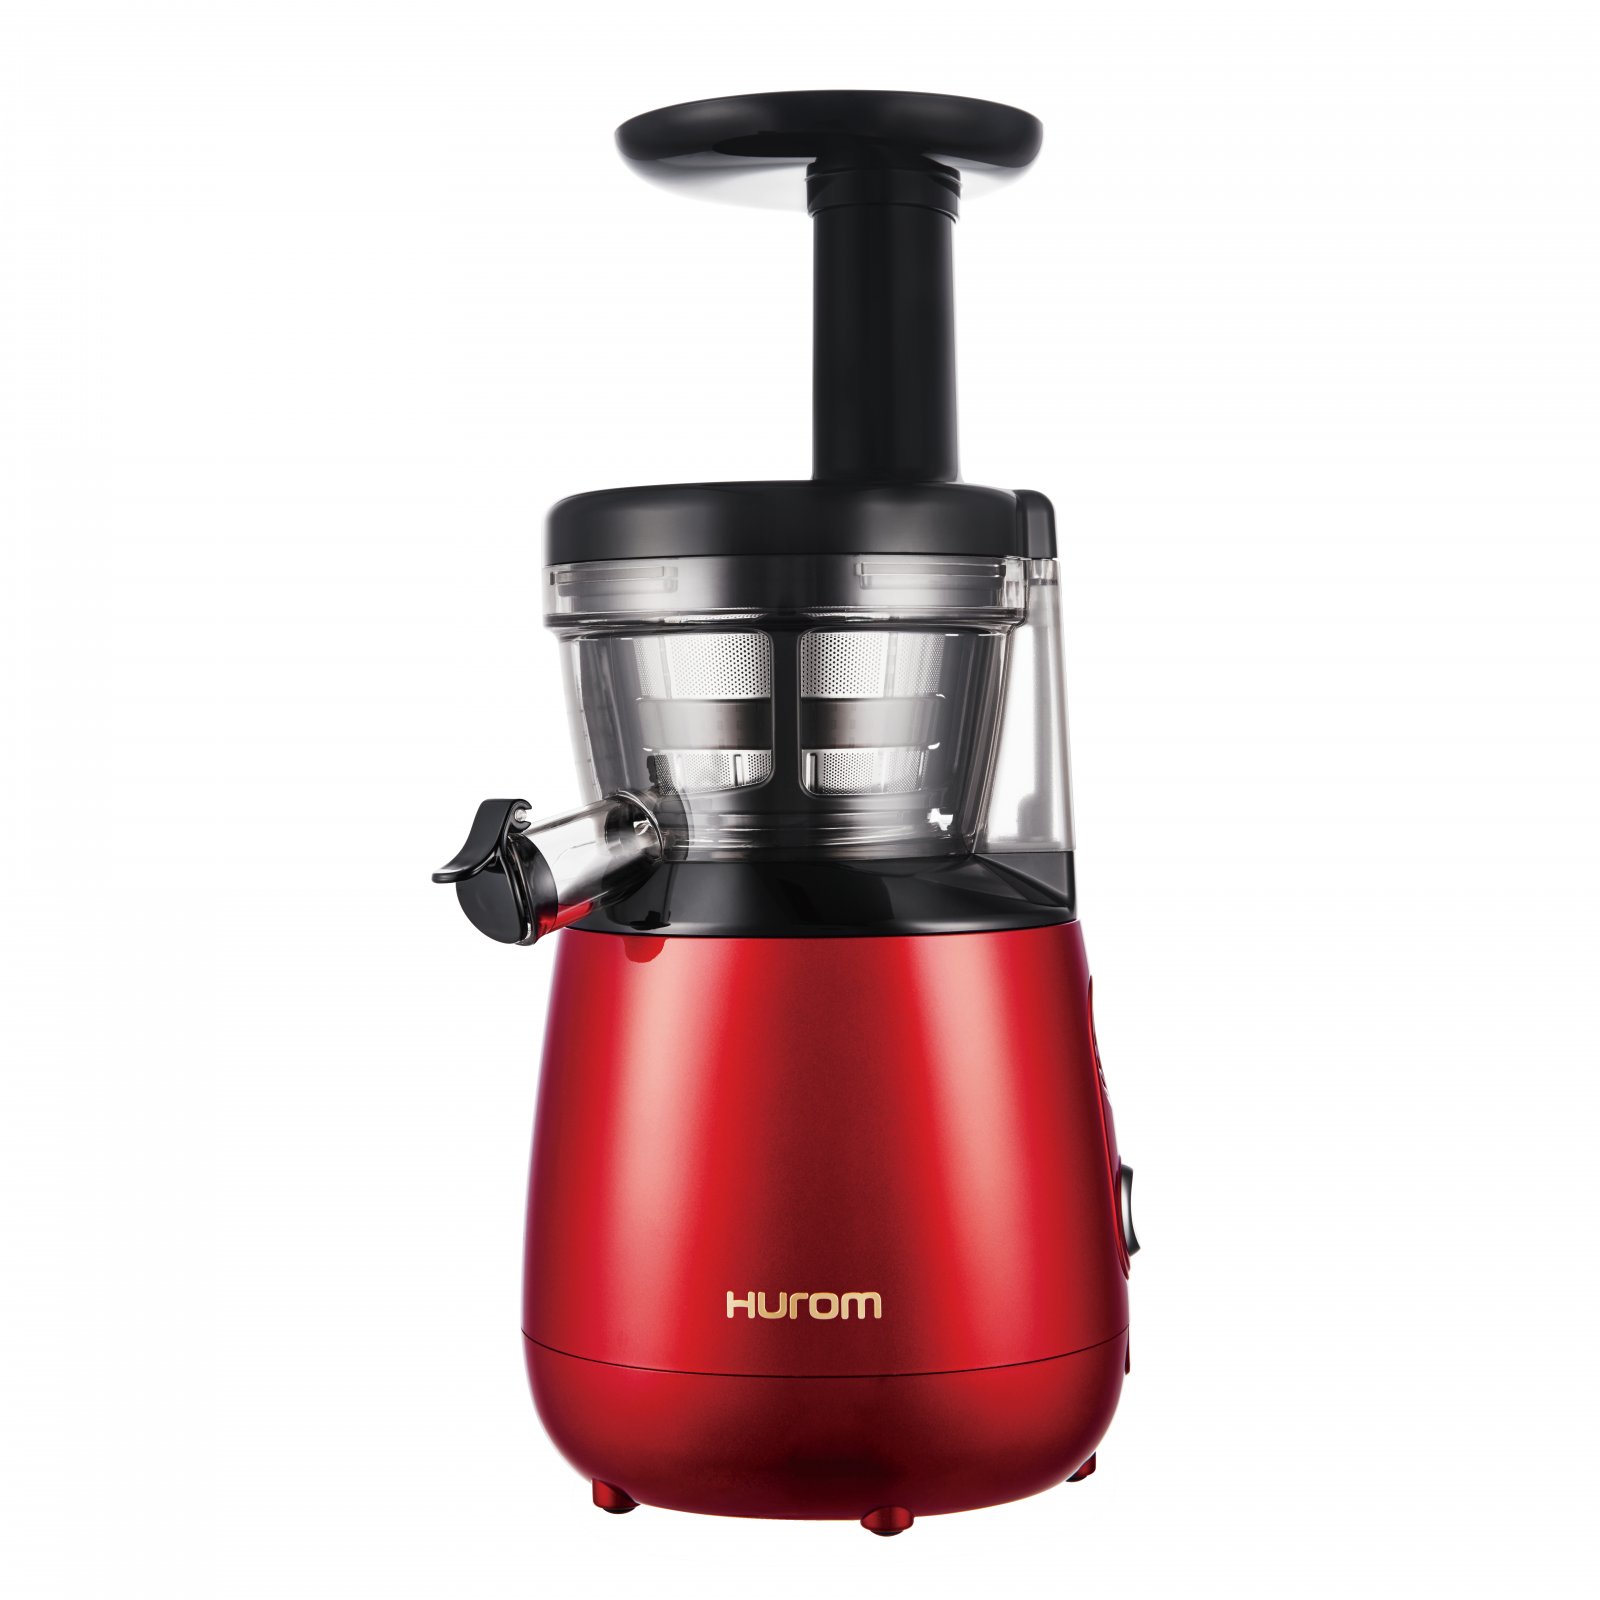 Hurom HP Basic Series Slow Juicer Basic Series Malaysia, Melaka Supplier,  Suppliers, Supply, Supplies | I KITCH SDN BHD